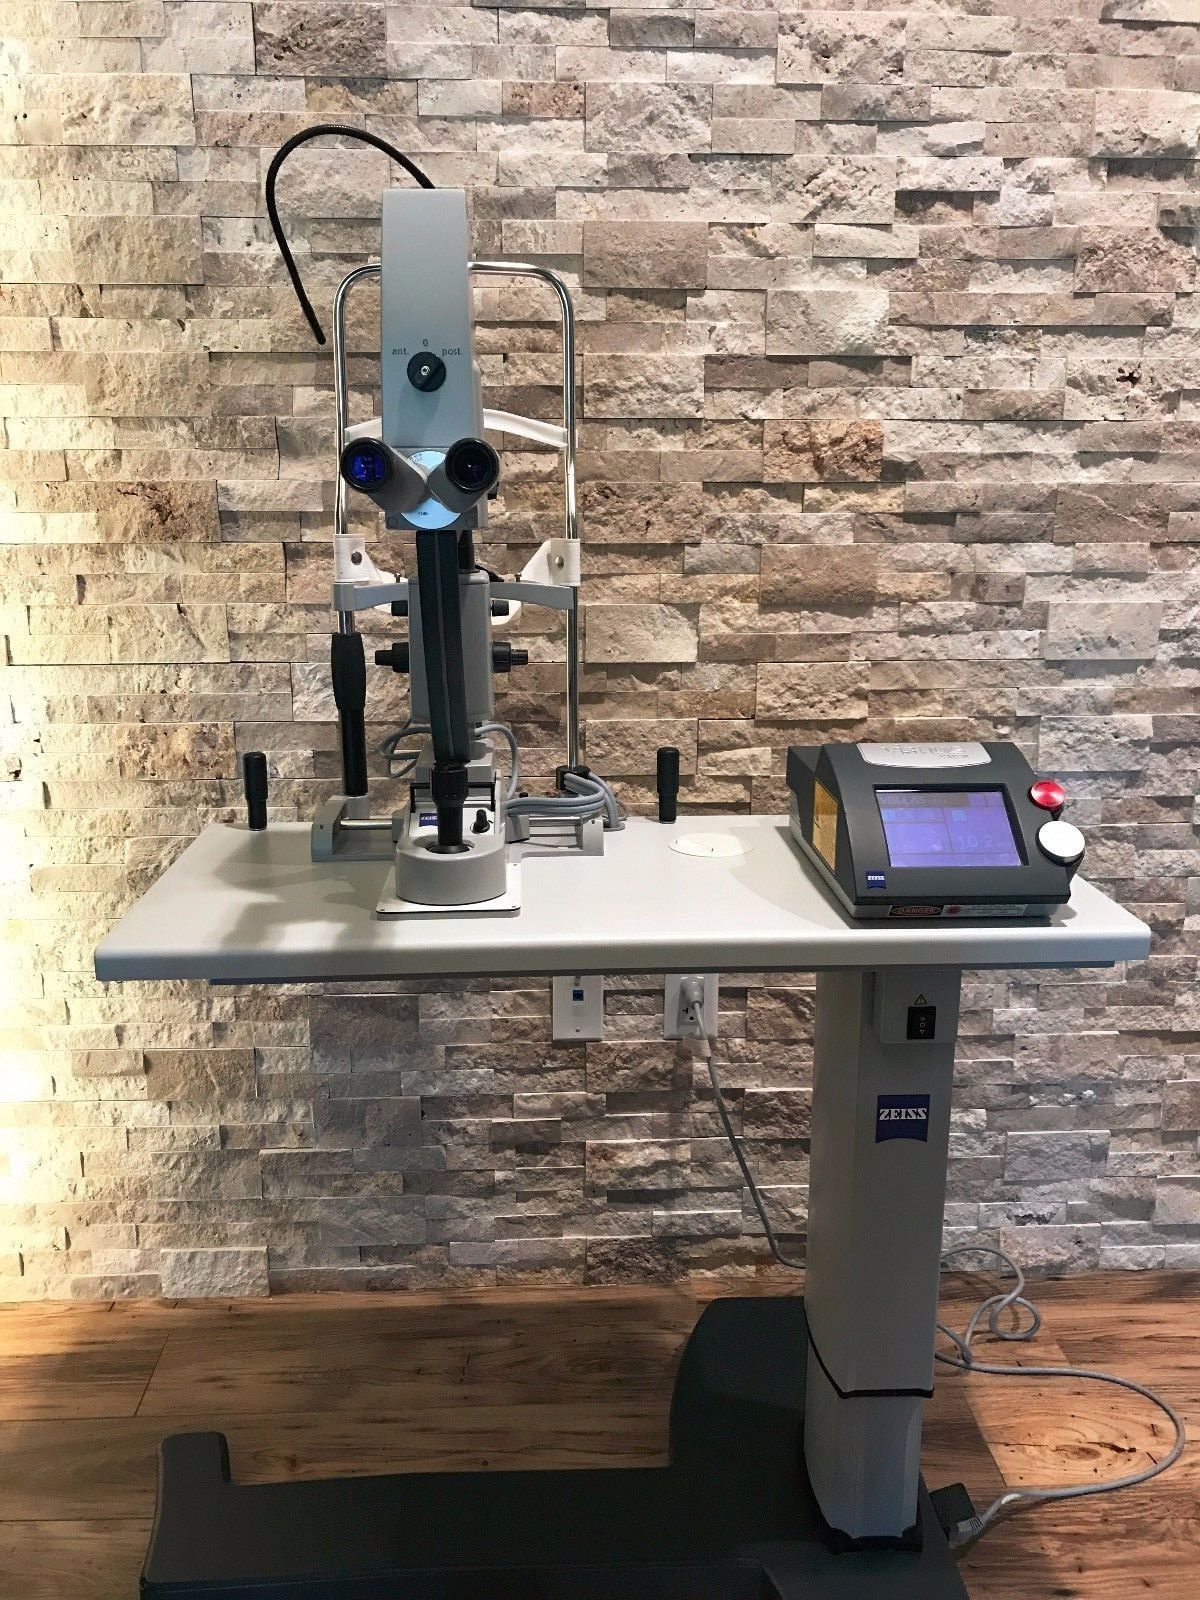 Zeiss Visulas Yag 3 Carl Zeiss OPMI Lumera Surgical Ophthalmic Microscope on S7 Rolling Stand